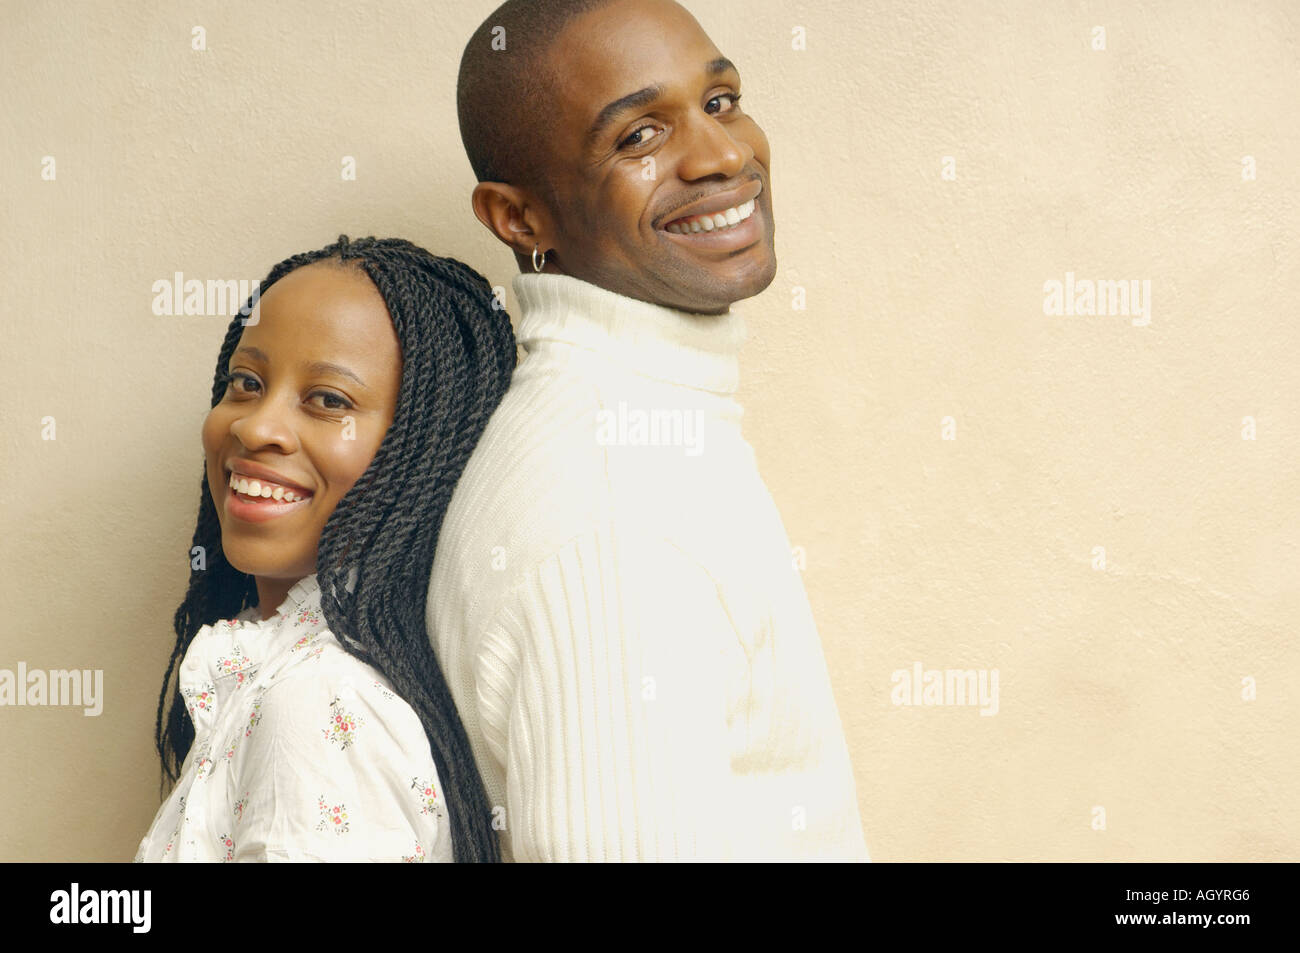 African American couple standing back to back smiling Stock Photo